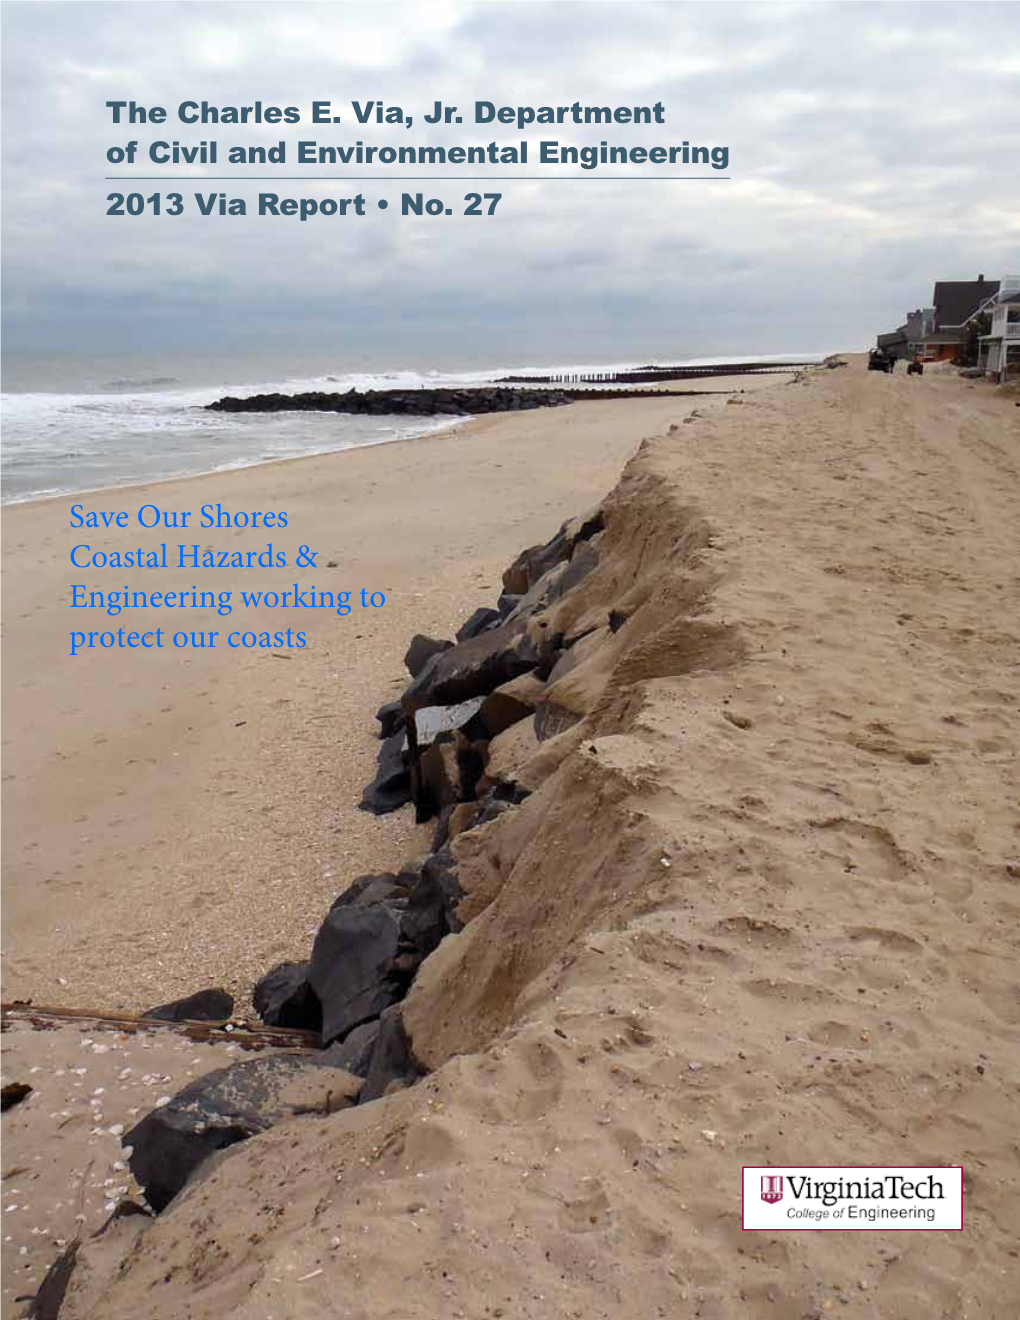 Save Our Shores Coastal Hazards & Engineering Working to Protect Our